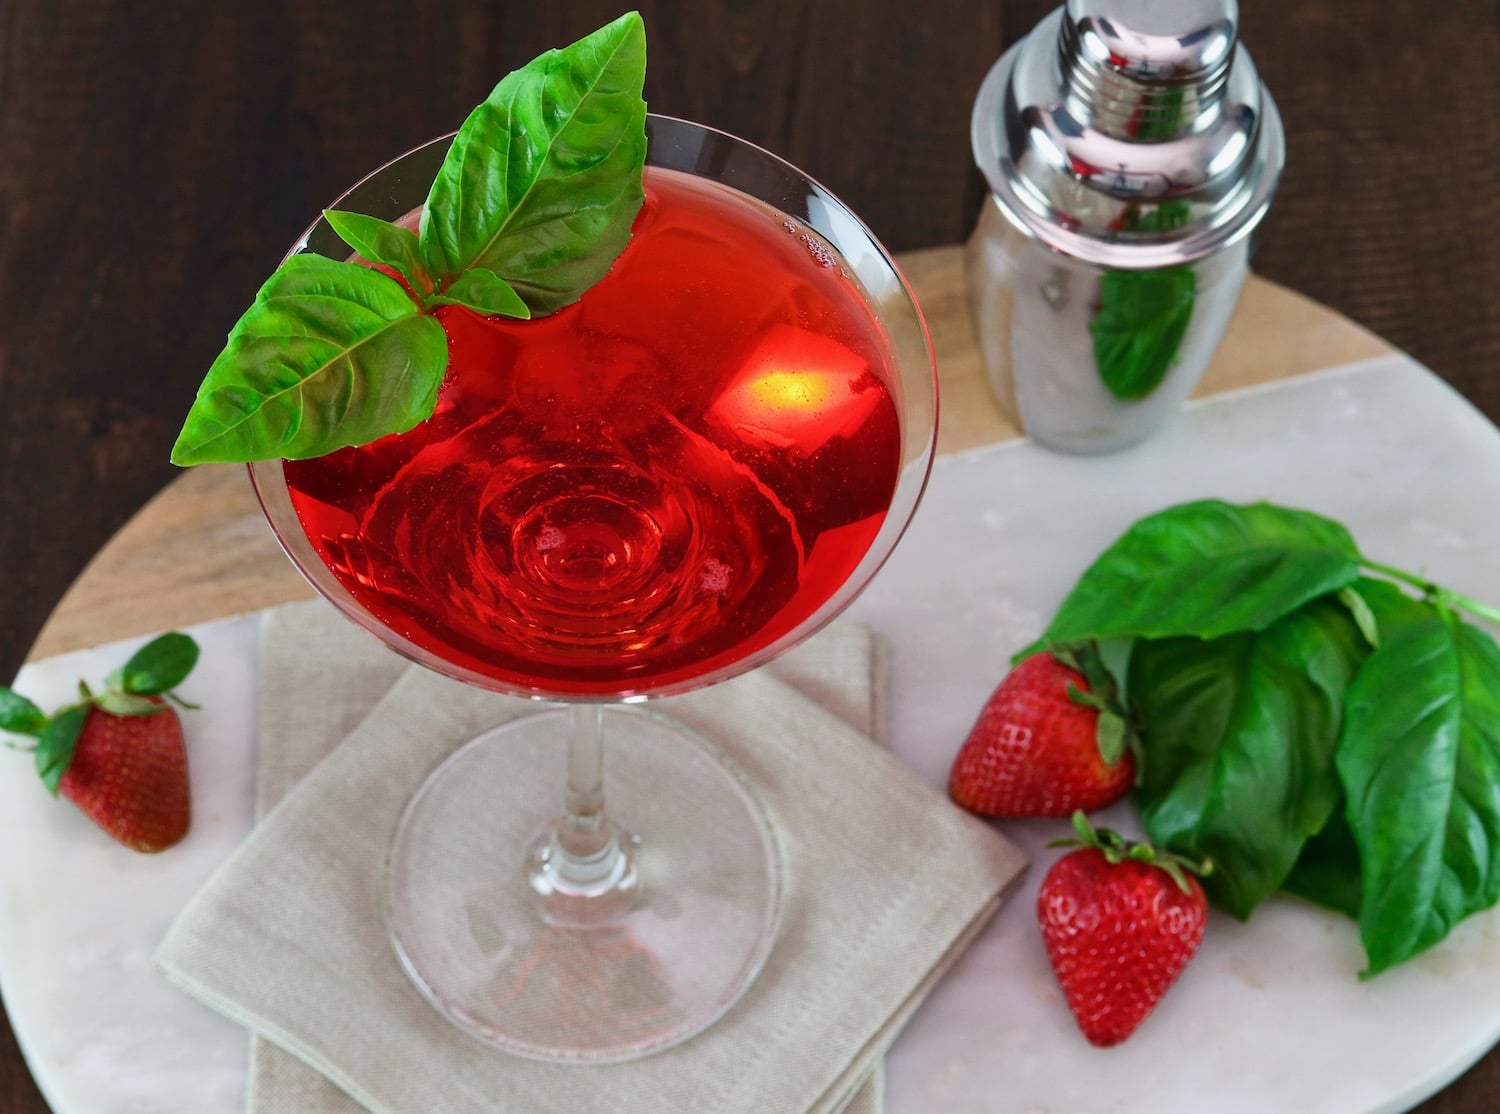 Angled overhead horizontal shot of a martini glass filled with a red strawberry basil martini cocktail, garnished with a sprig of basil. A steel cocktail shaker sits off to the right side next to fresh basil and strawberries.